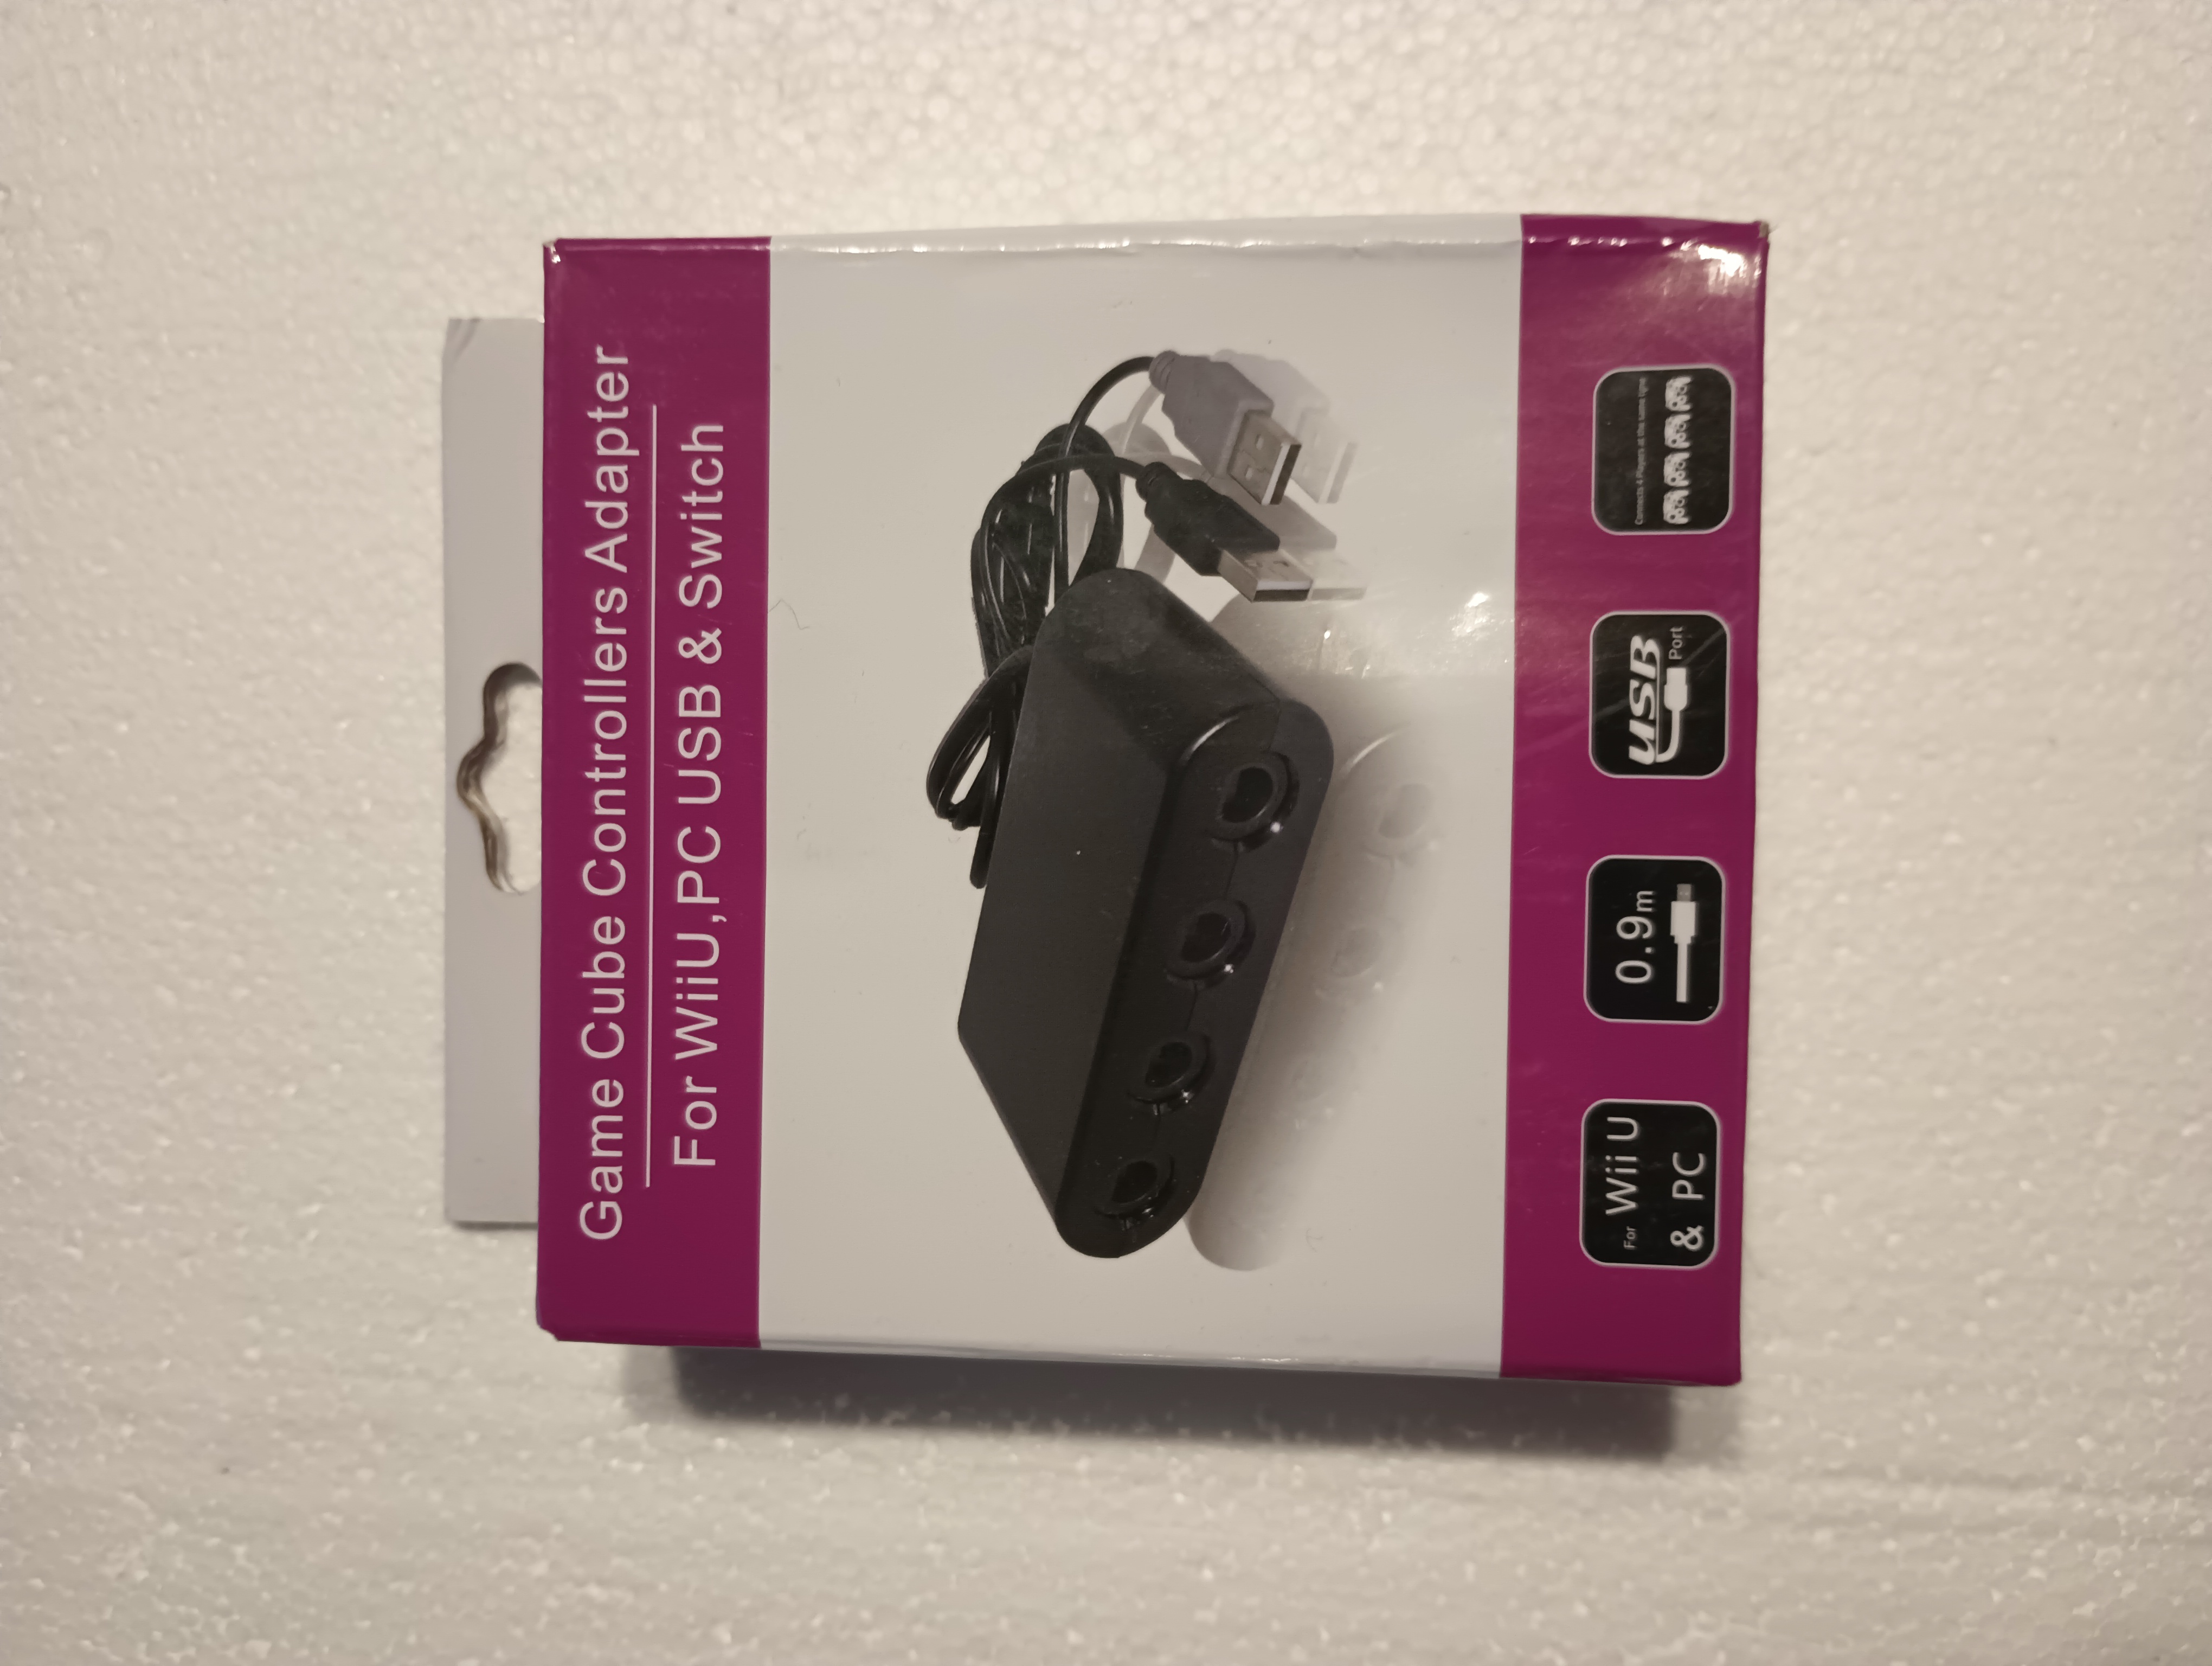 Gamecube Controllers Adapter (New)